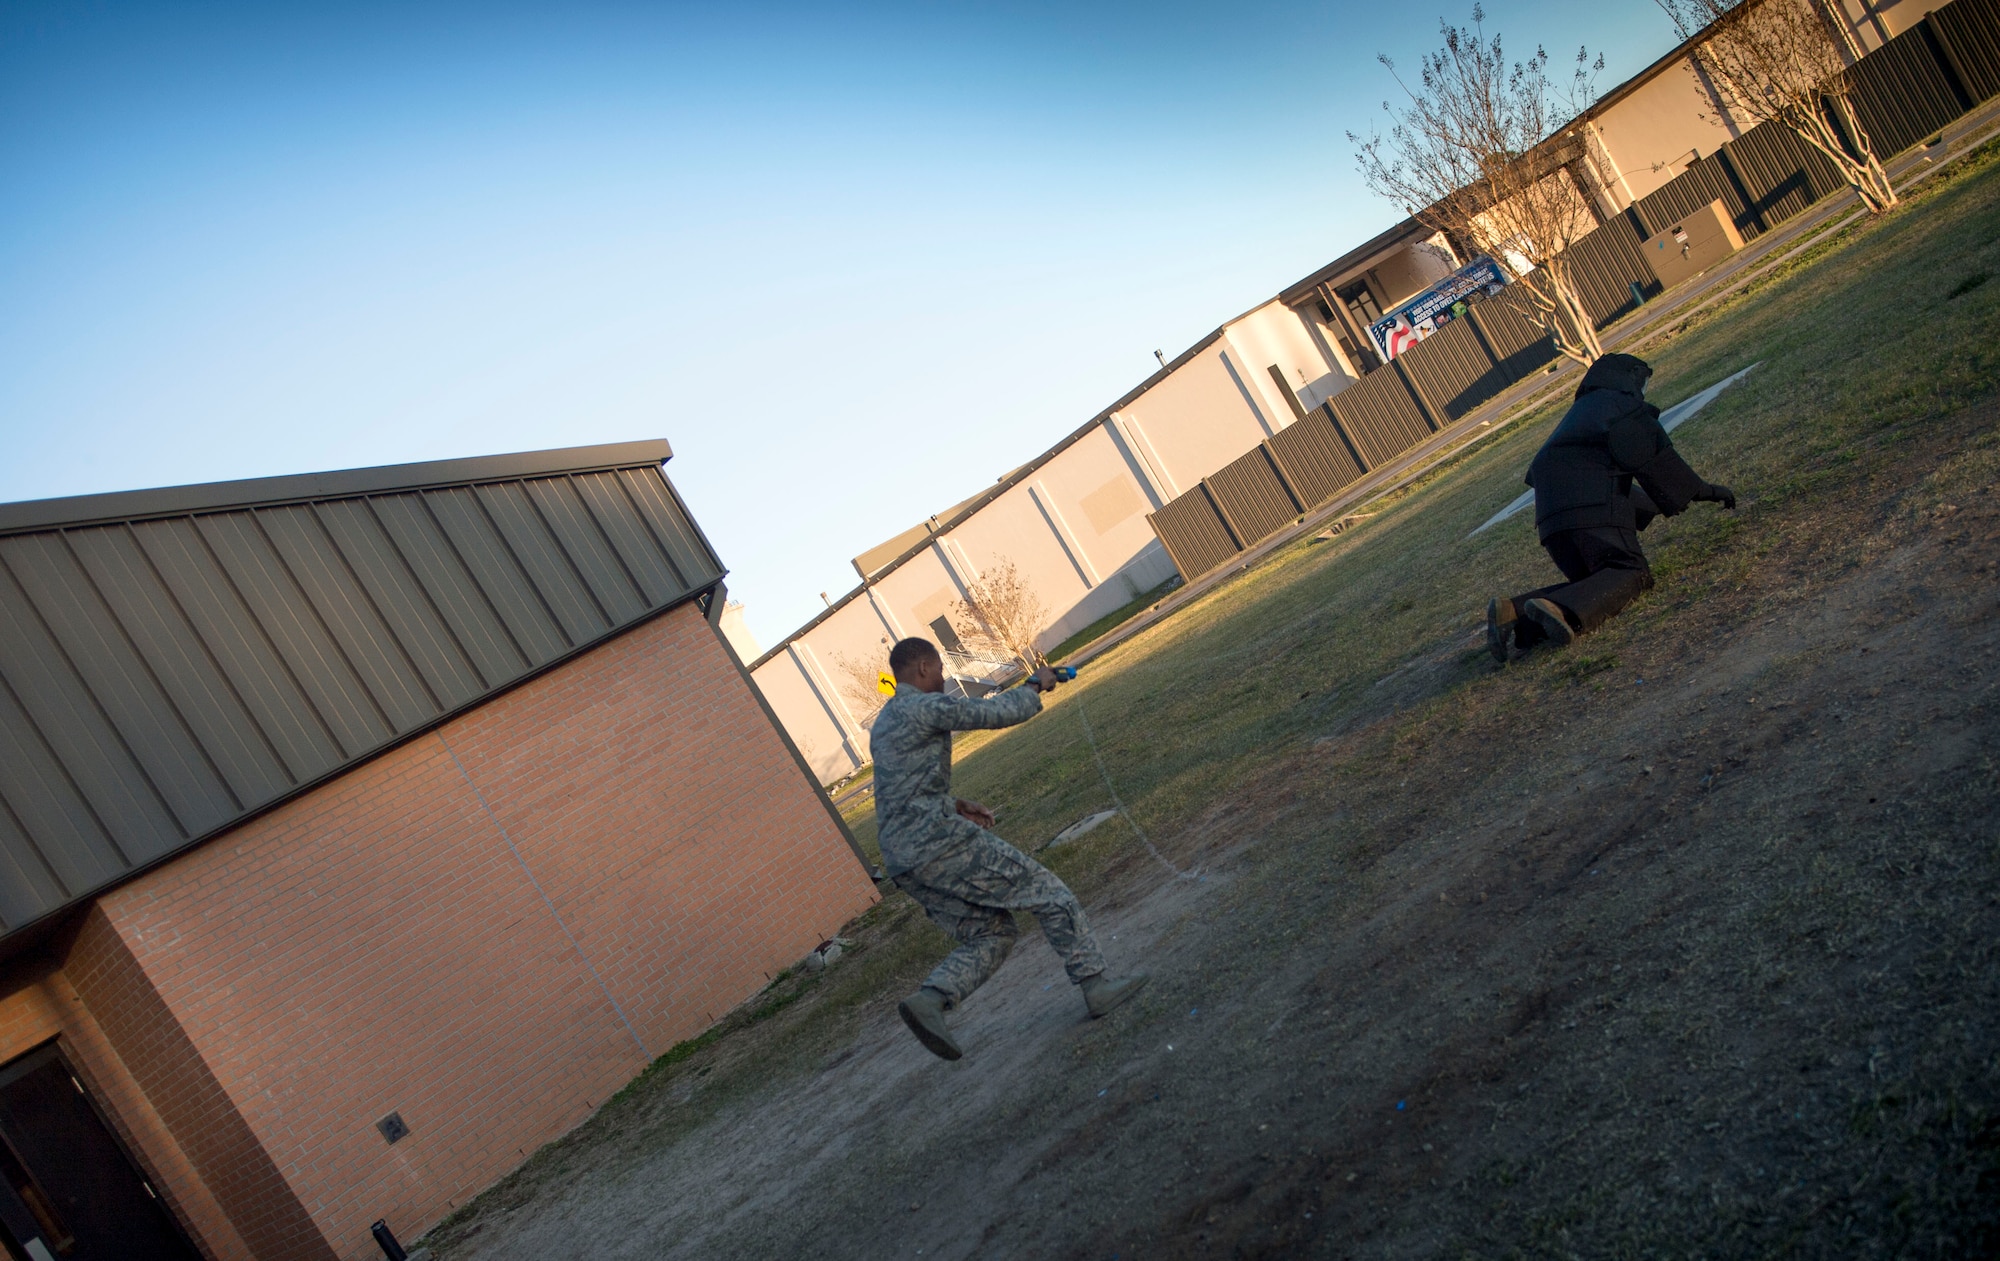 Staff Sgt. Kendrick Woodson, an installation patrolman with the 1st Special Operations Security Forces Squadron, incapacitates a suspect during taser training at the 1st SOSFS, Hurlburt Field, Fla., Feb. 10, 2016. Security Forces personnel are taught the correct way to tase and apprehend a suspect. (U.S. Air Force photo by Senior Airman Krystal M. Garrett)  